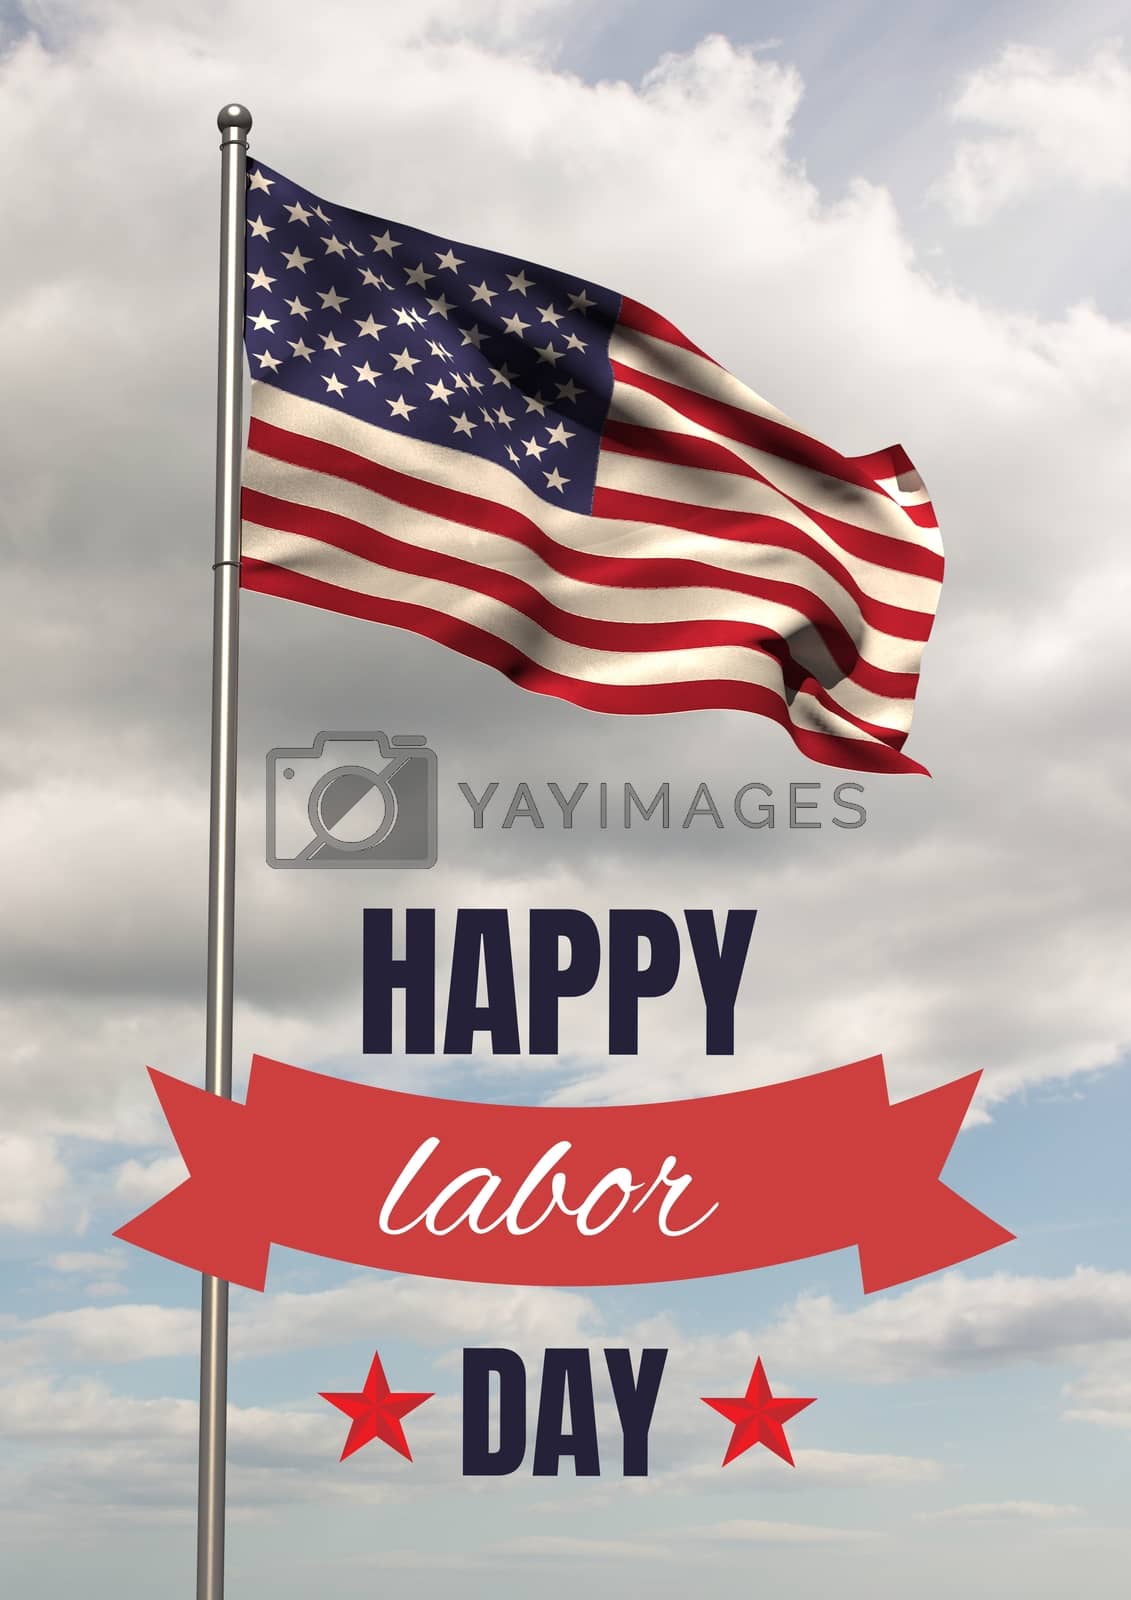 Royalty free image of Labor day text over US flag by Wavebreakmedia